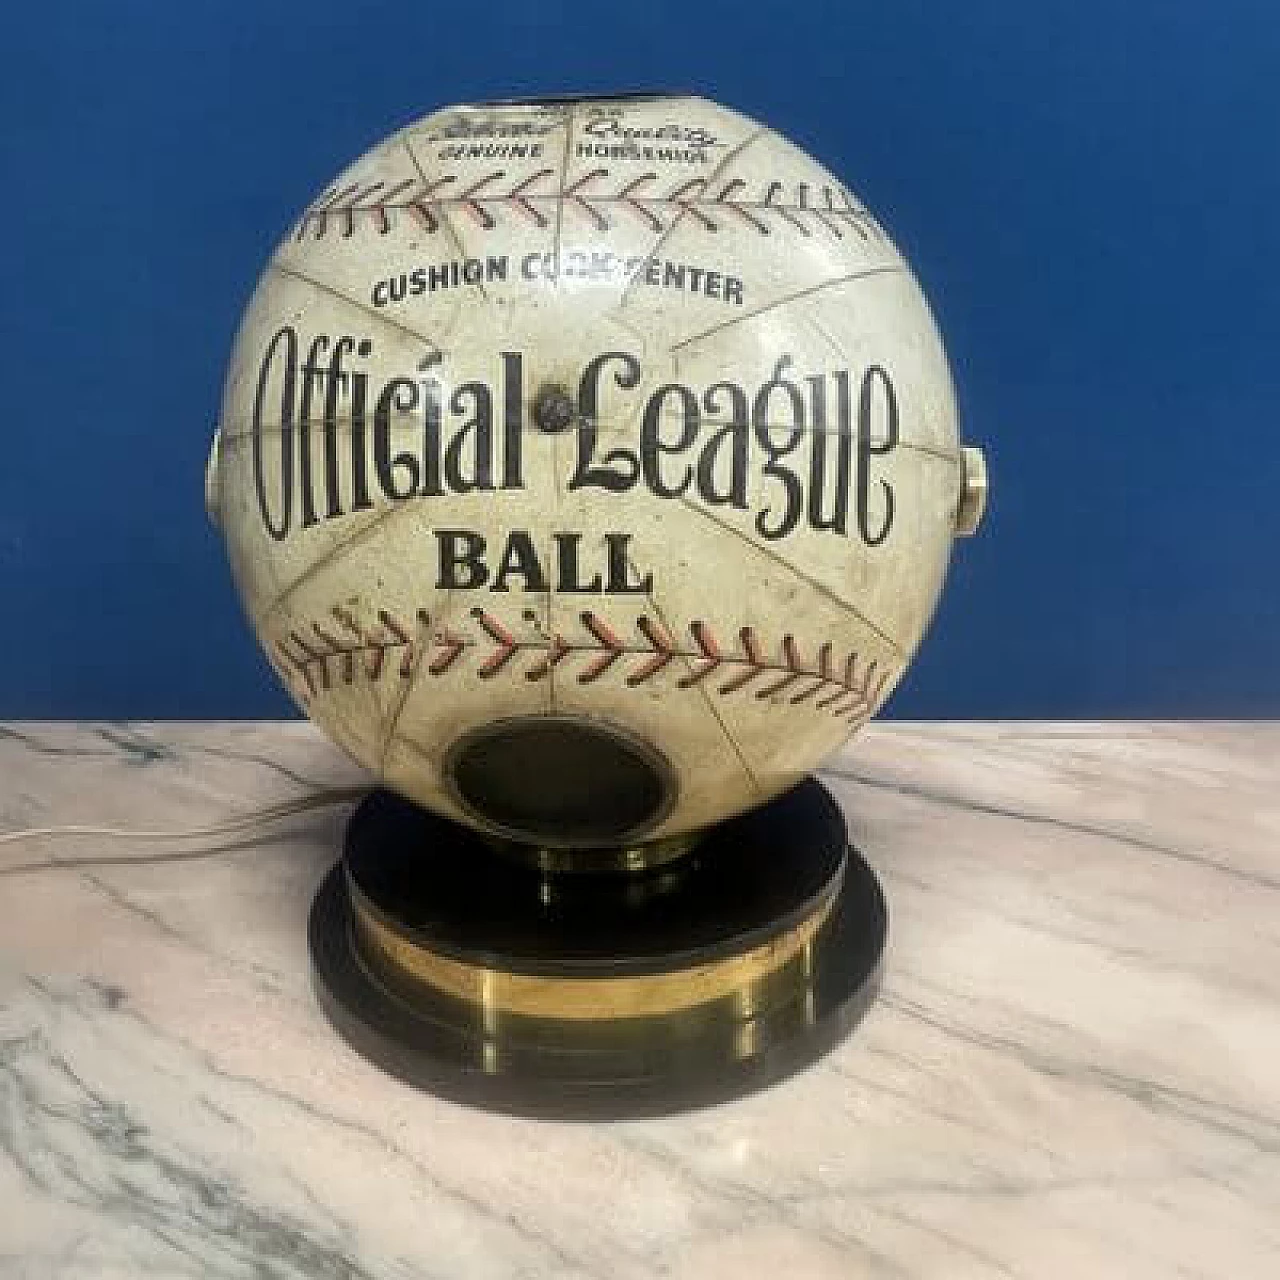 Radio trophy in the shape of a baseball, 1941 1